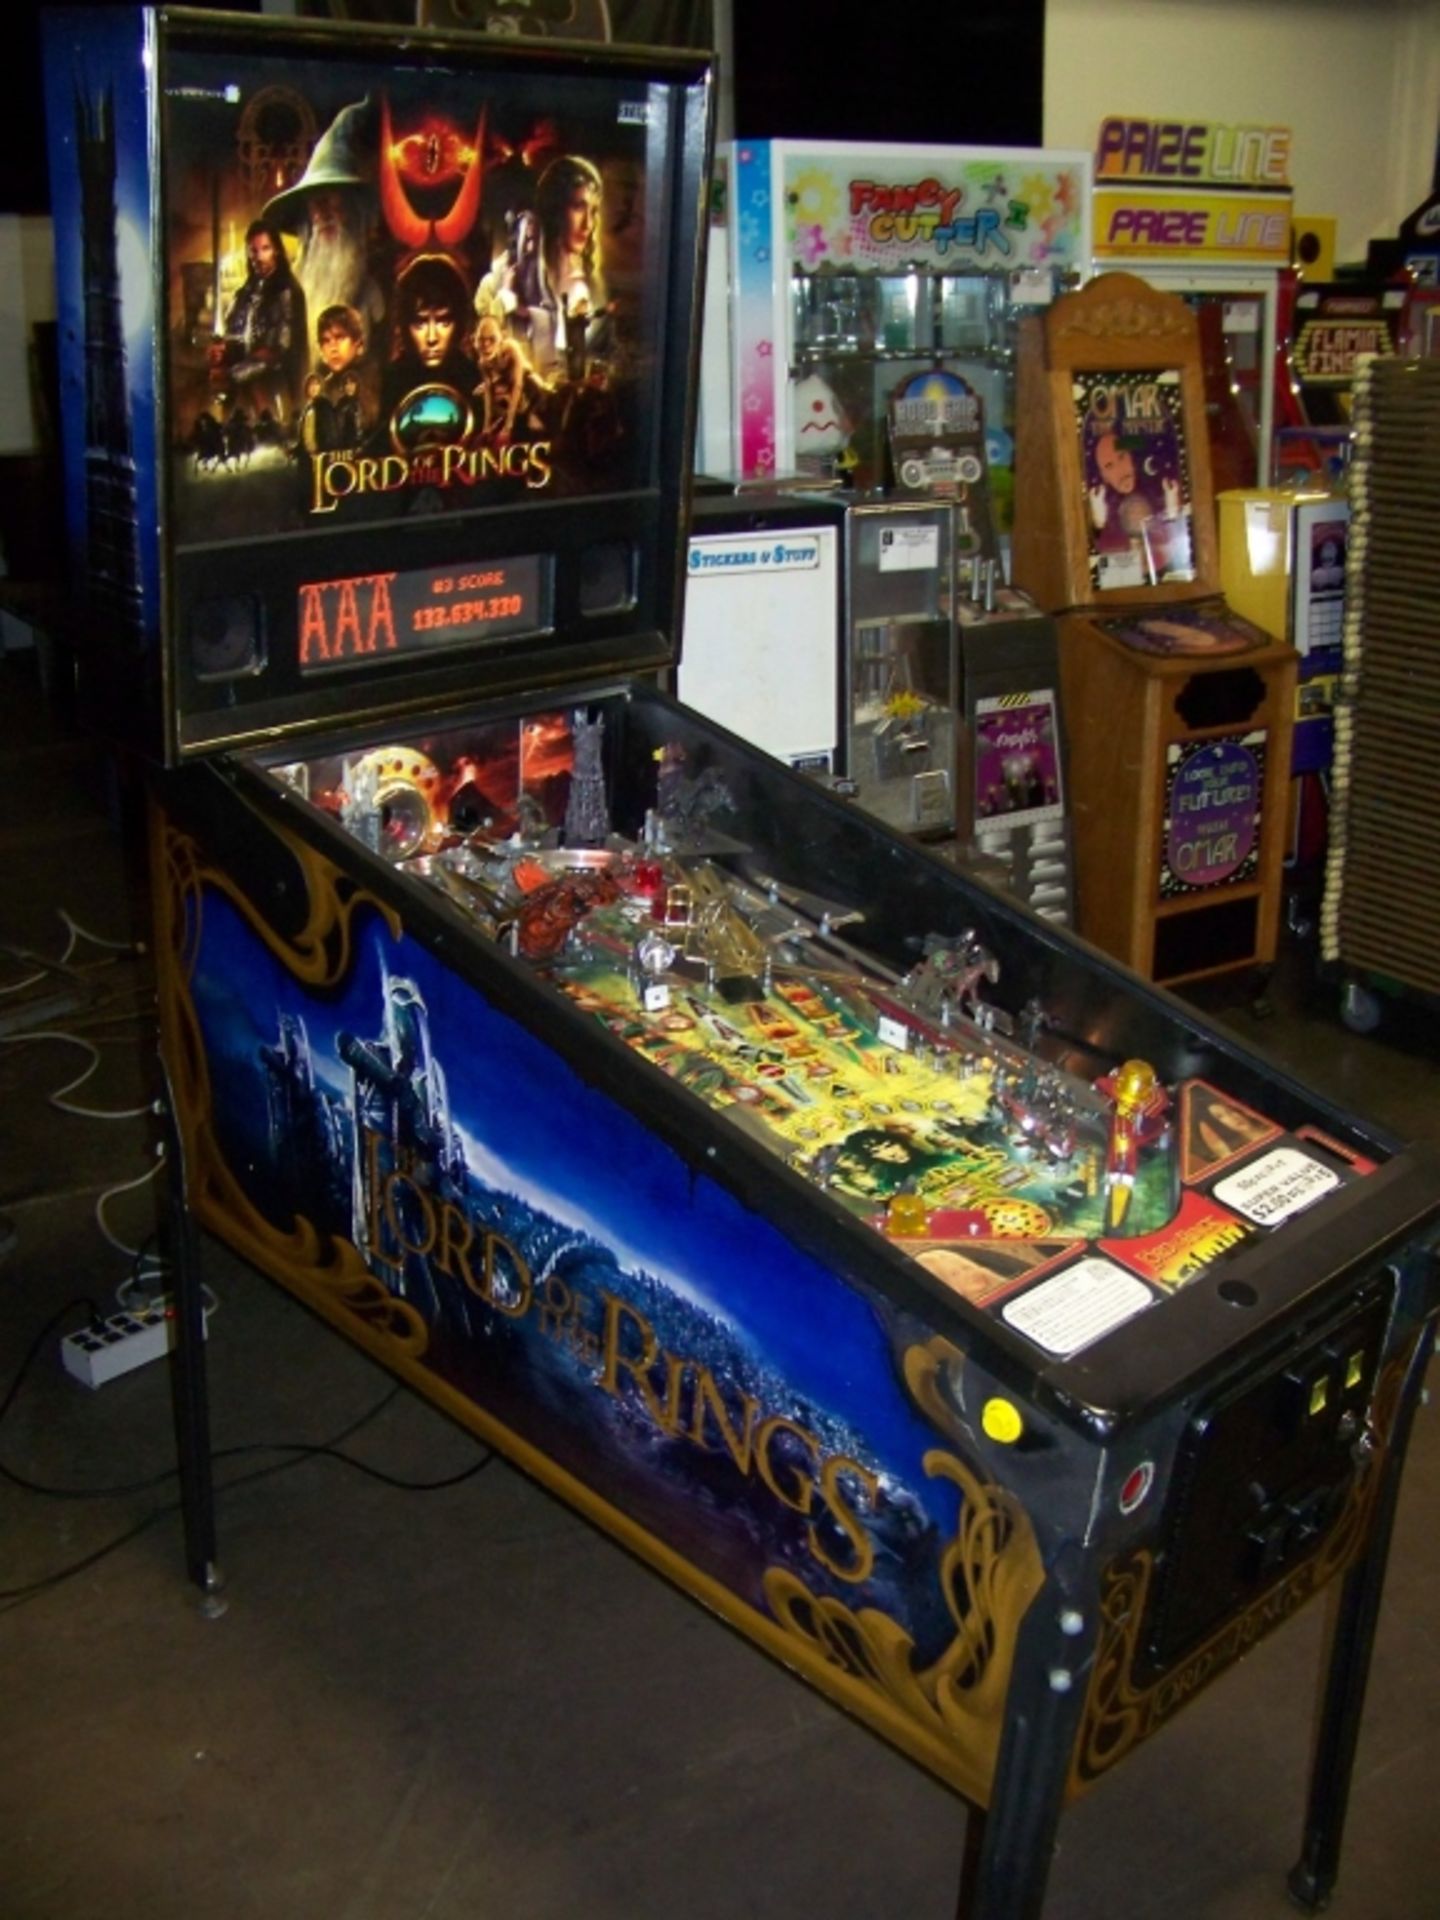 LORD OF THE RINGS PINBALL MACHINE STERN Item is in used condition. Evidence of wear and commercial